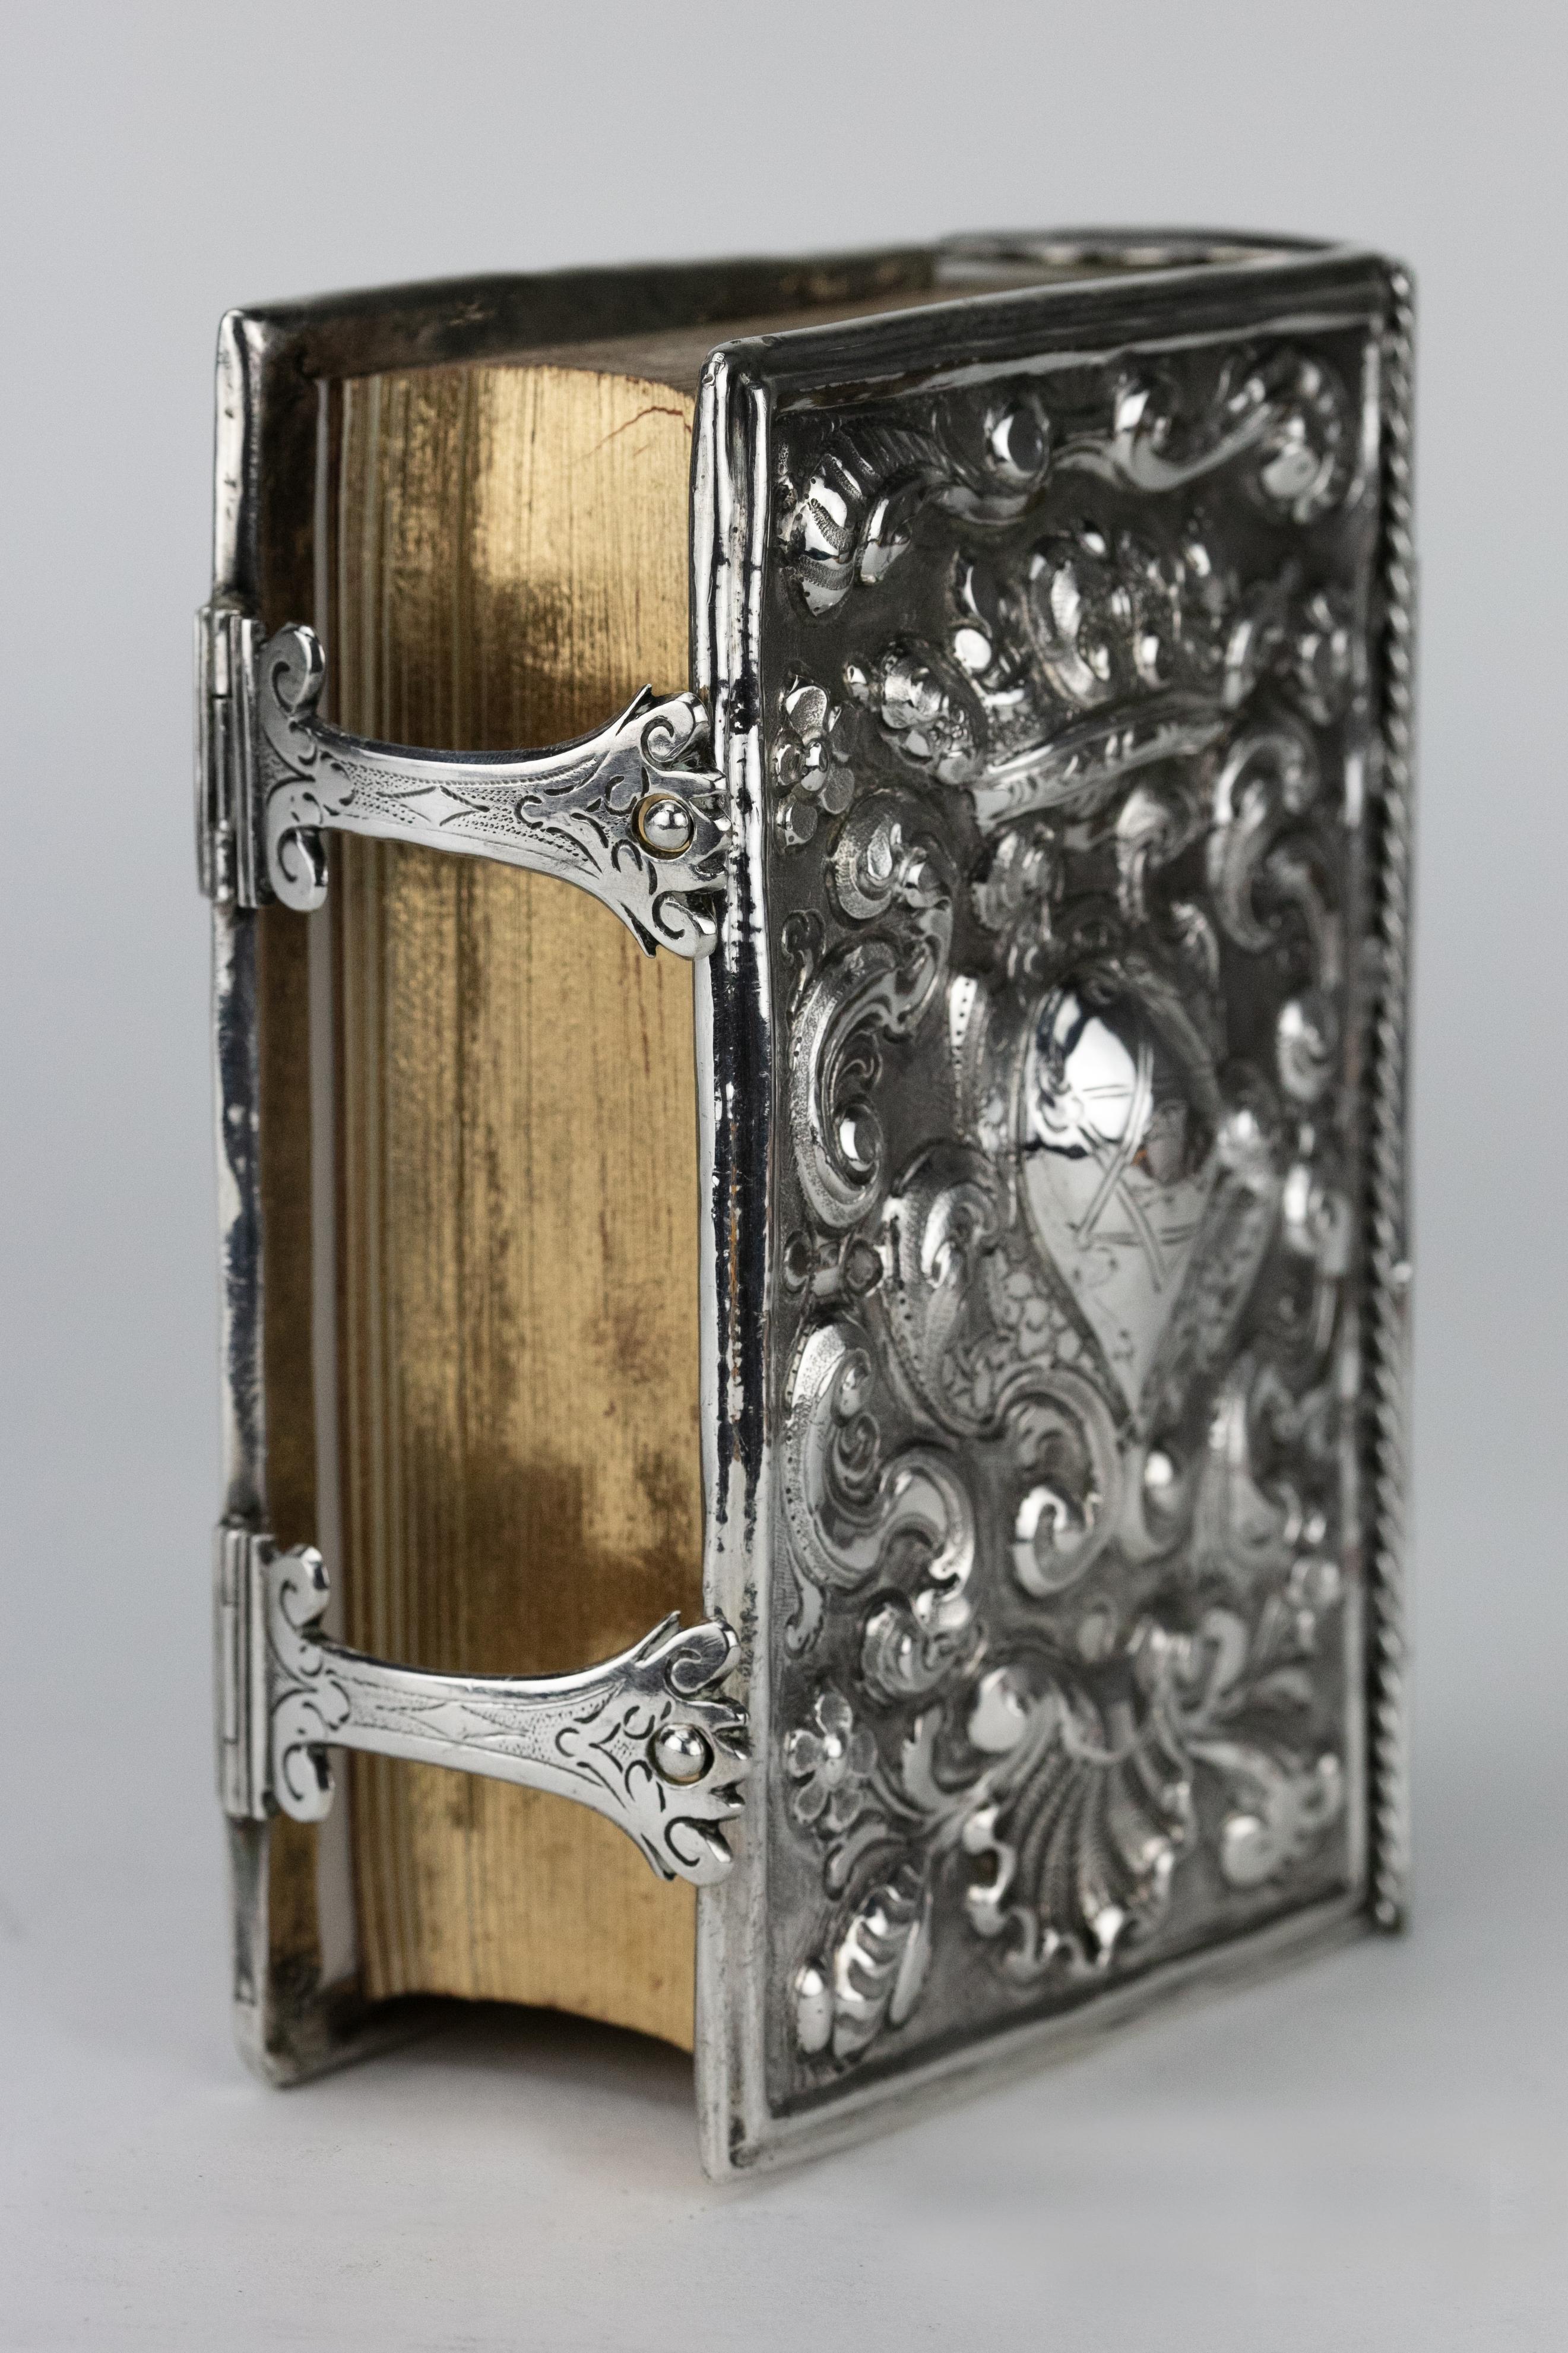 Hand-embossed Judaic book binding, Venice, Italy, circa 1700.
Both covers bolding embossed with armorials below coronets framed by scrolls, flowers, and a shell, spine chased to match, on matted ground.

Every item in Menorah Galleries is